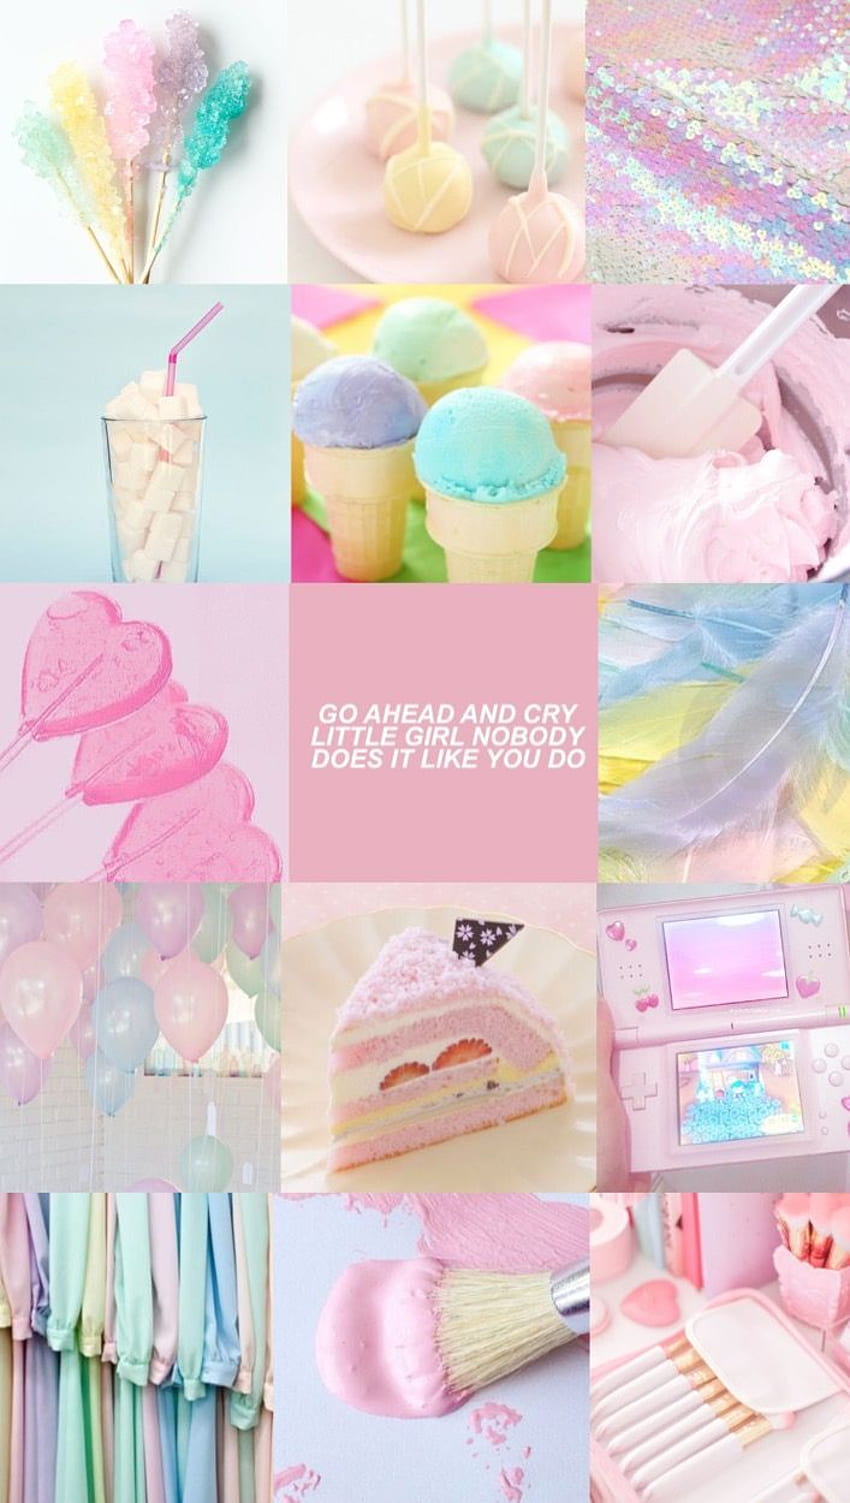 A collage of pictures with pink and purple colors - Pastel rainbow